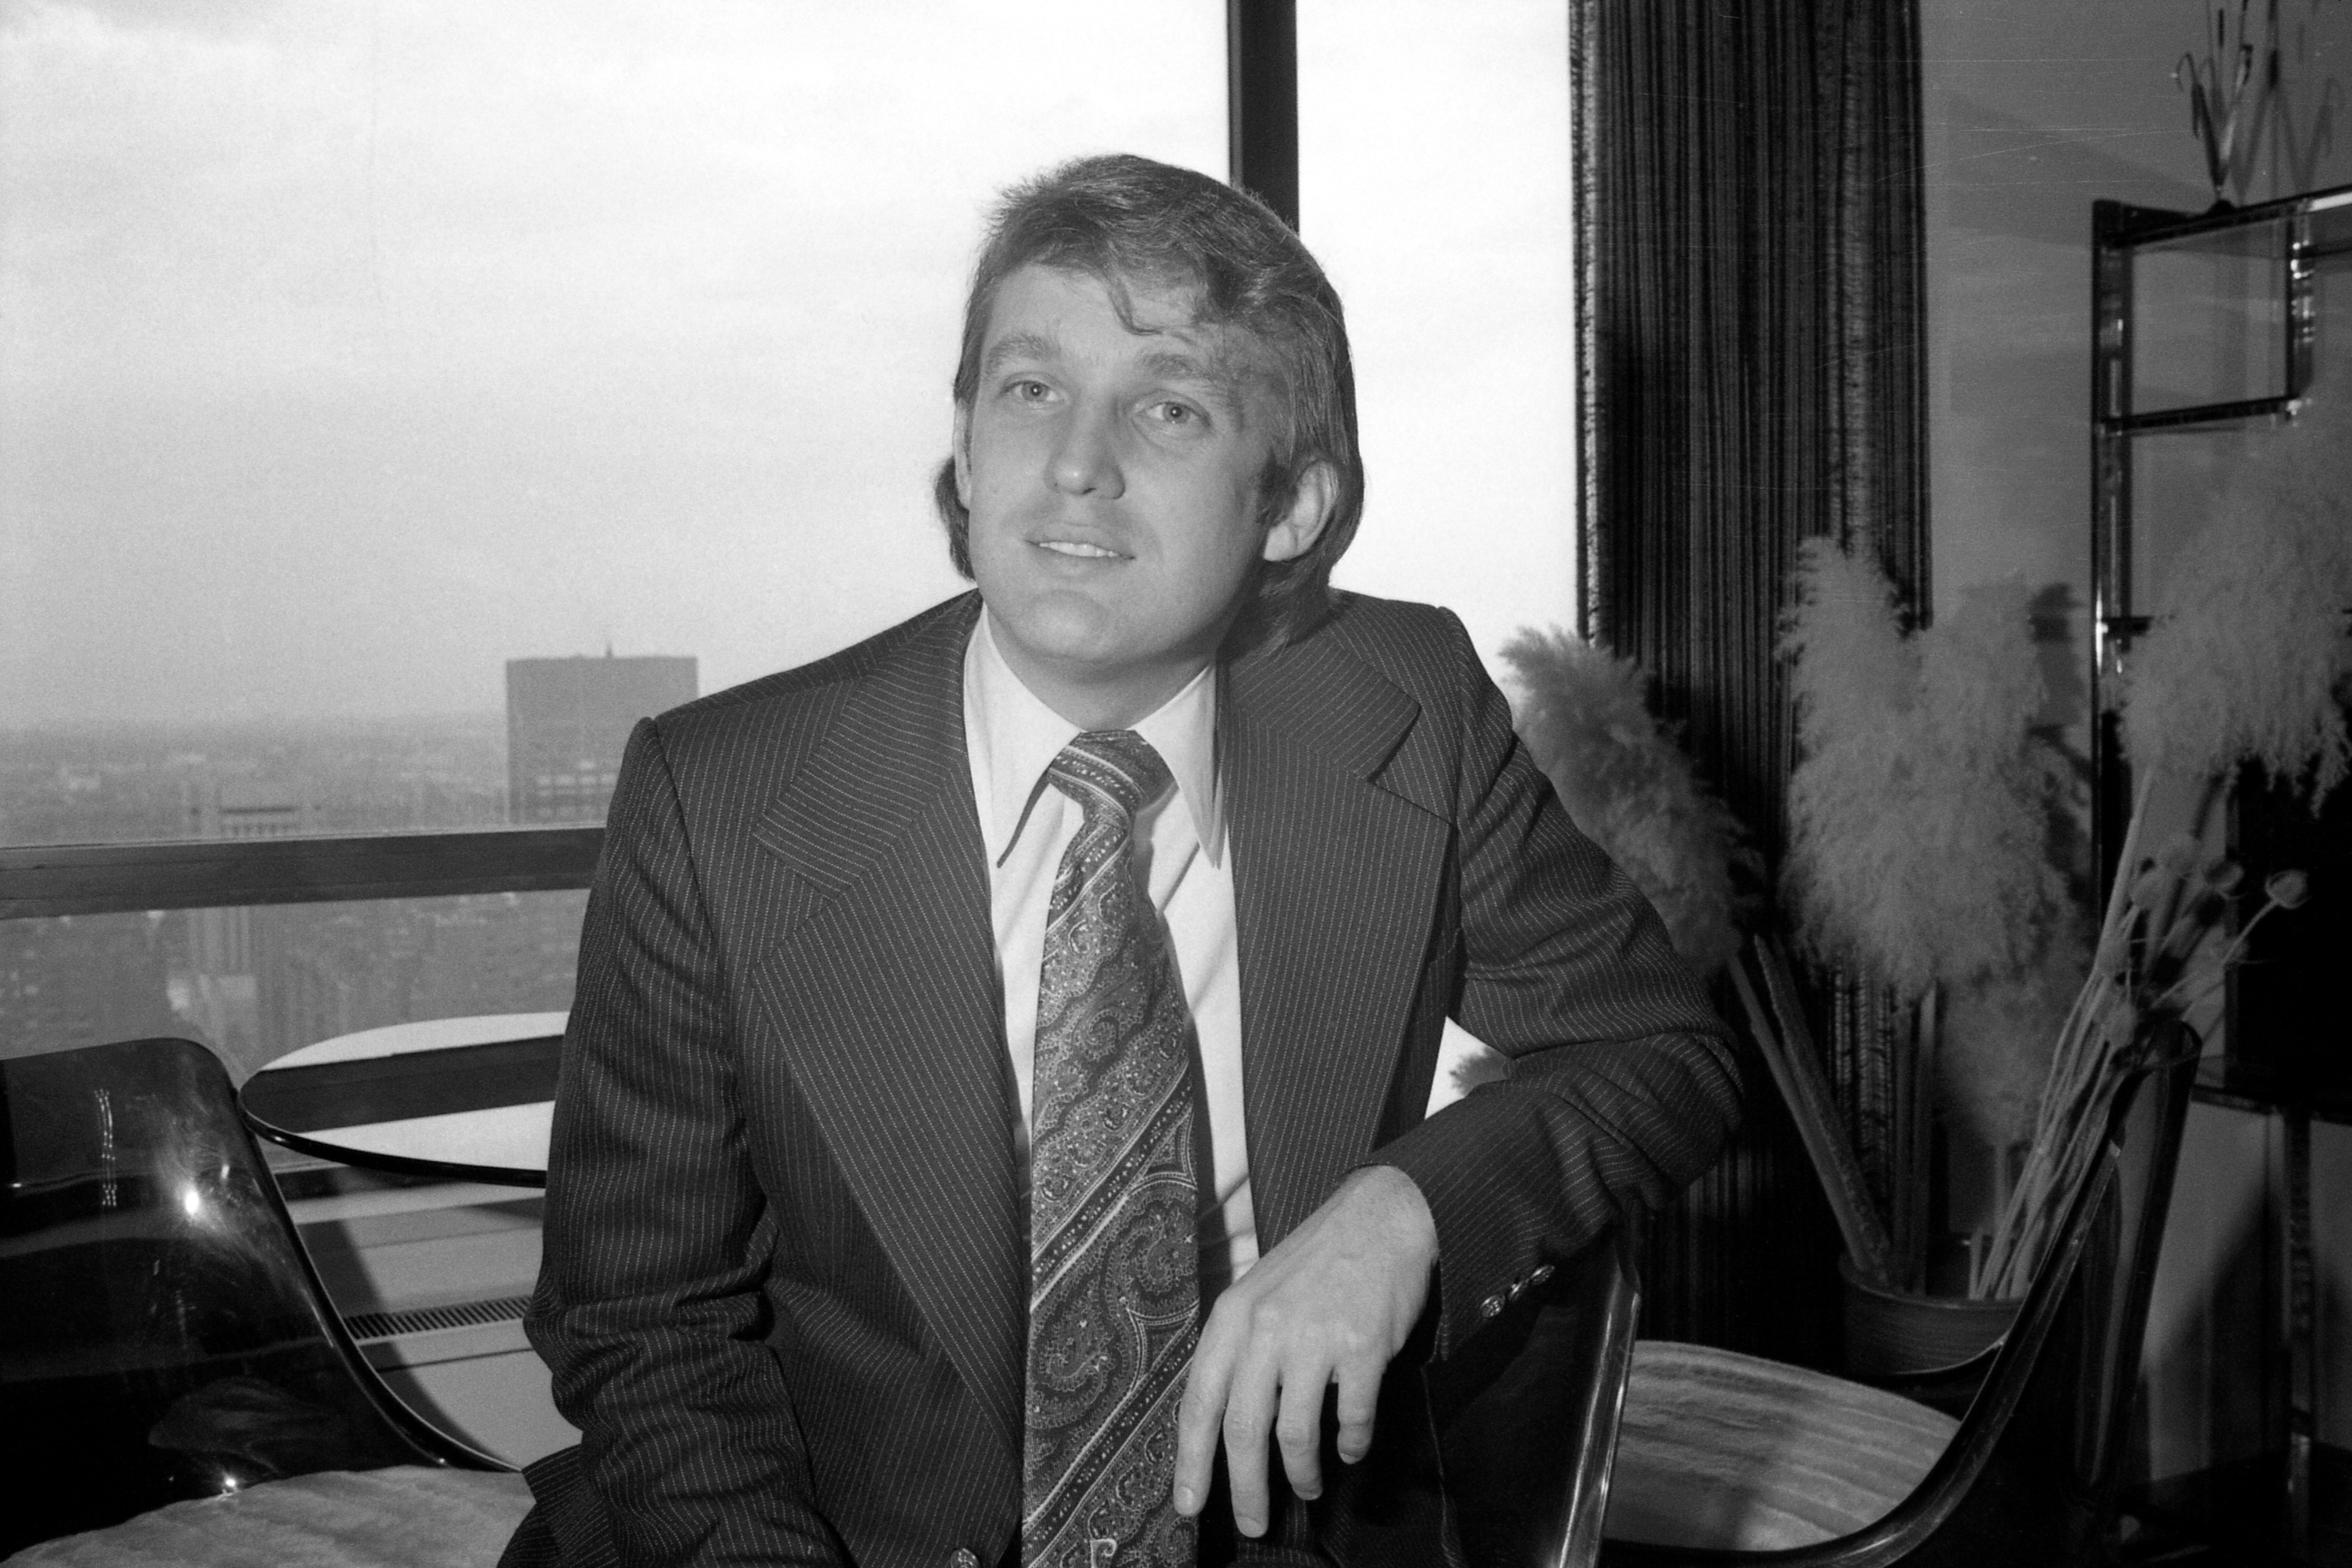 A young Trump wearing a suit and seated in front of a window in skyscraper.